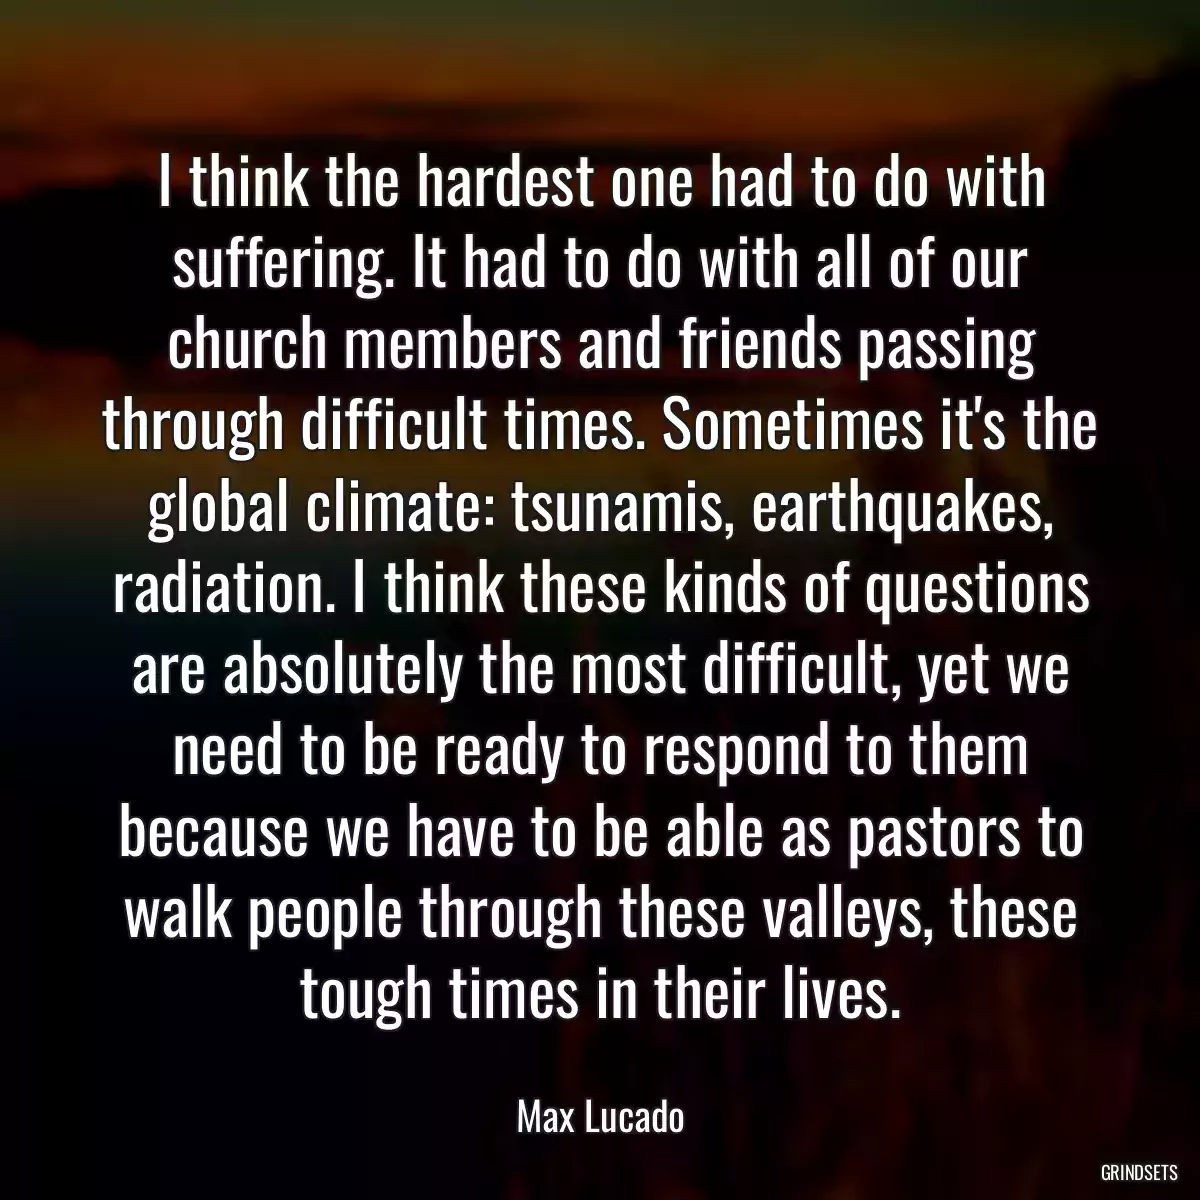 I think the hardest one had to do with suffering. It had to do with all of our church members and friends passing through difficult times. Sometimes it\'s the global climate: tsunamis, earthquakes, radiation. I think these kinds of questions are absolutely the most difficult, yet we need to be ready to respond to them because we have to be able as pastors to walk people through these valleys, these tough times in their lives.